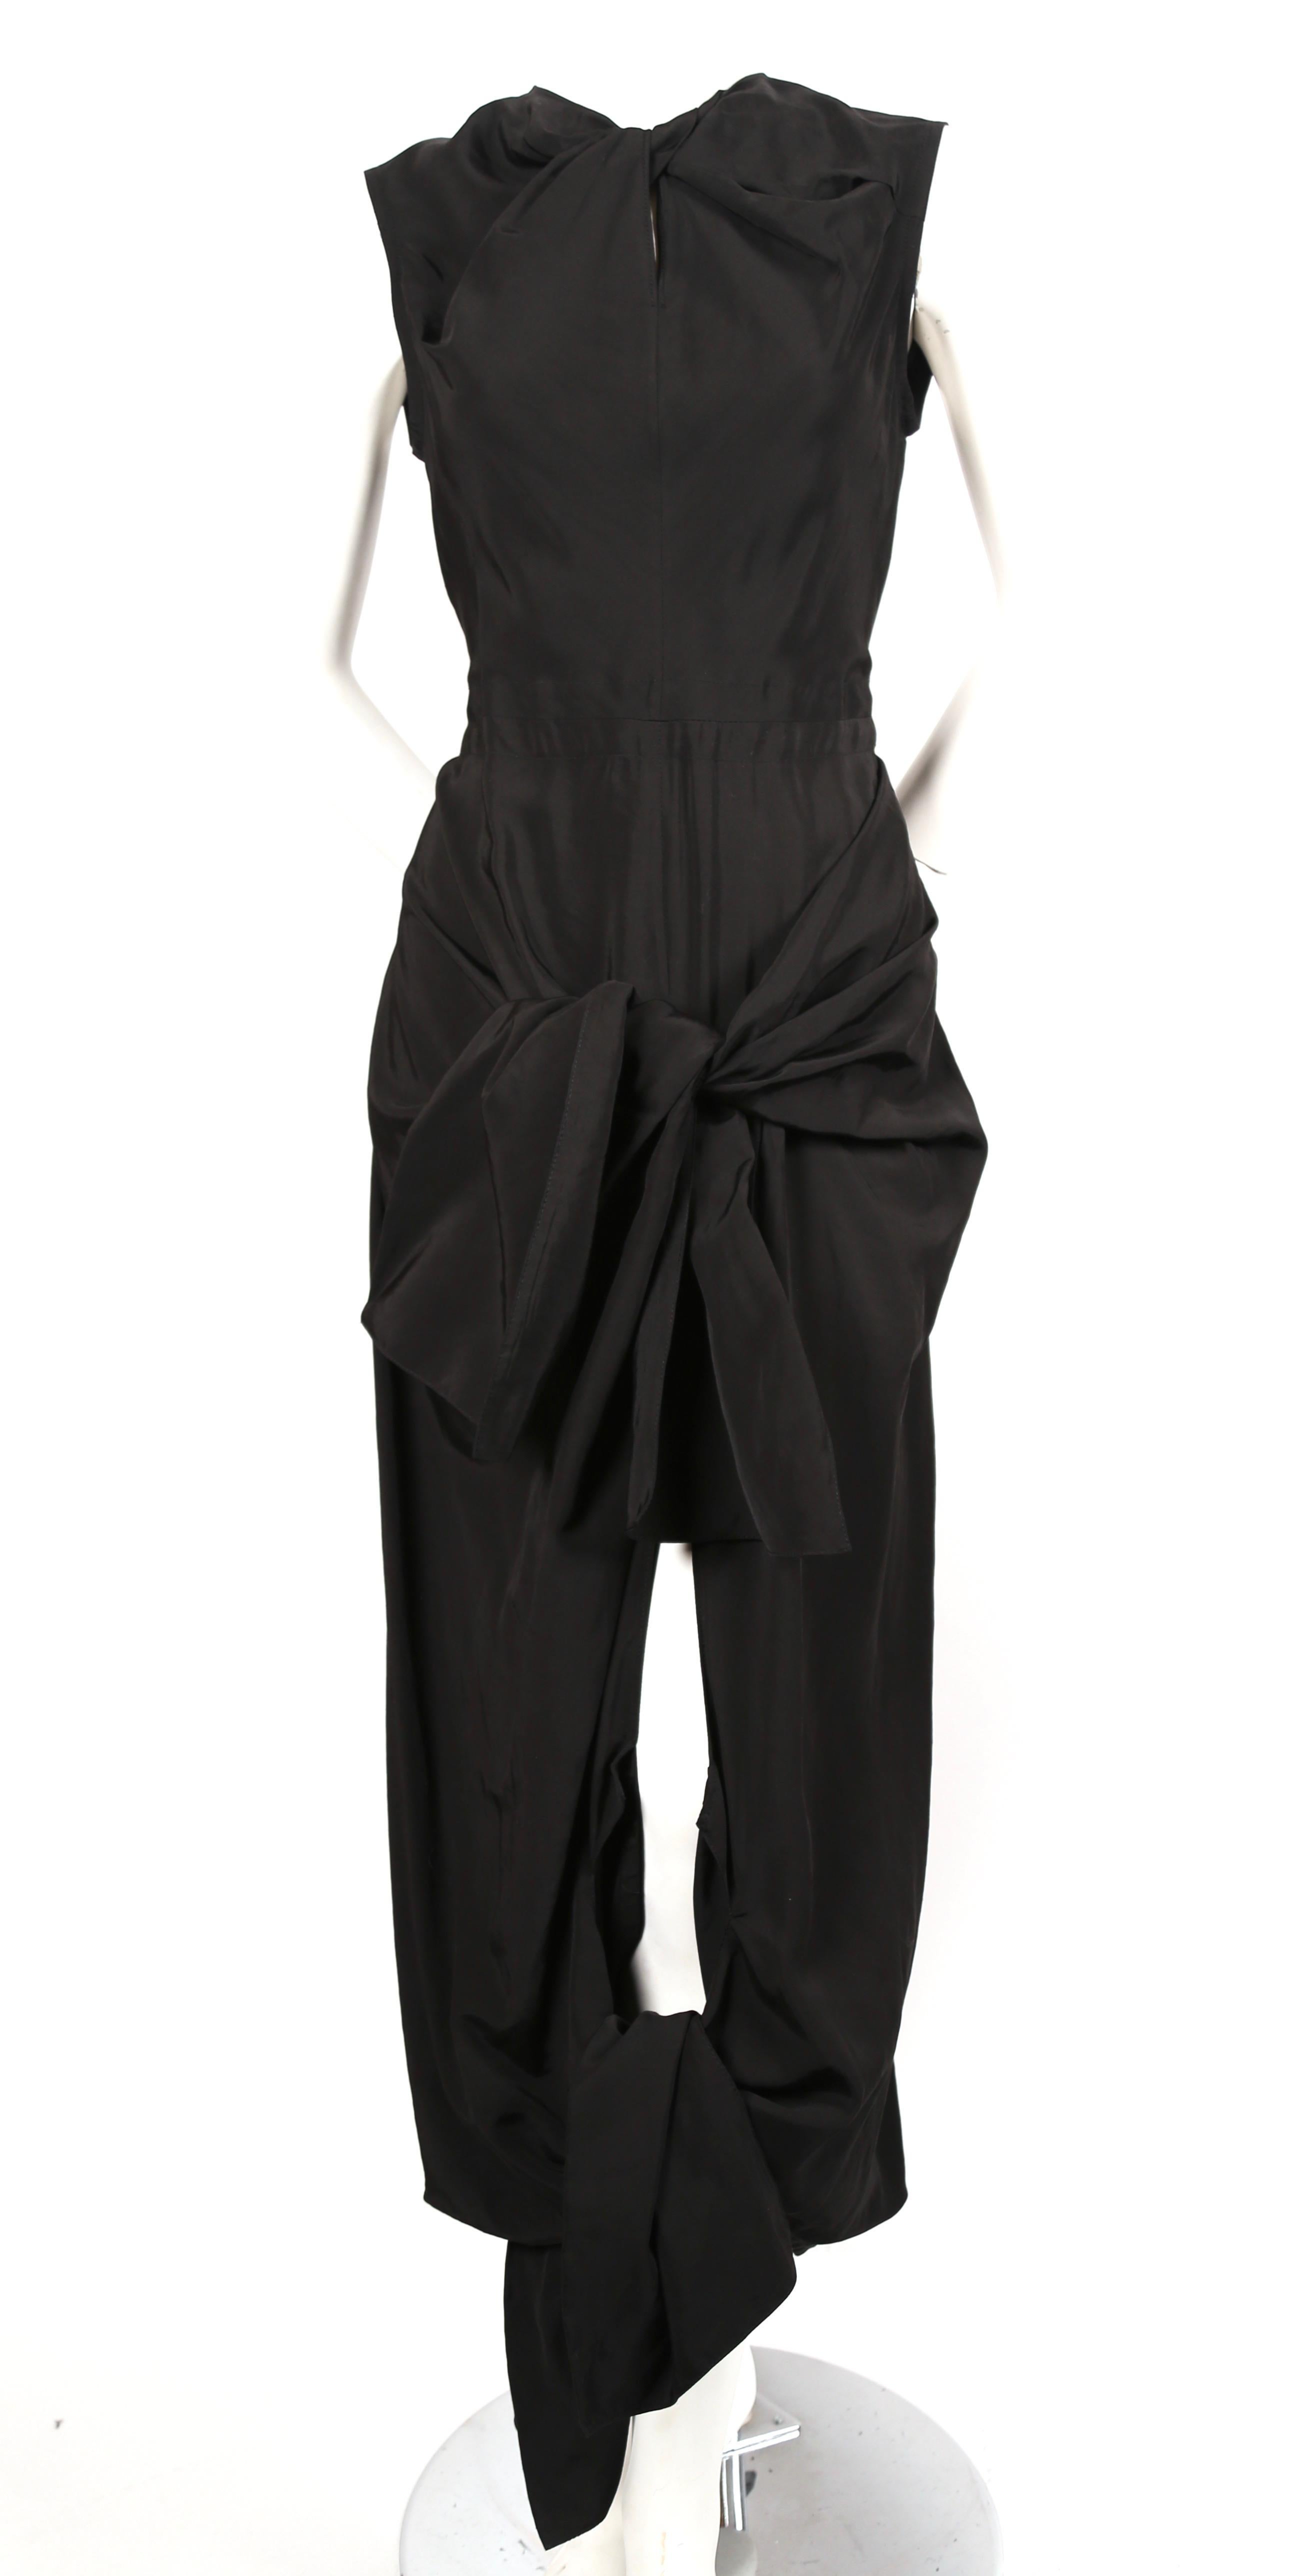 Jet black dress with twisted neckline, ties at hips and cut out at back designed by Phoebe Philo for Celine. French size 38. Approximate measurements: shoulder 14